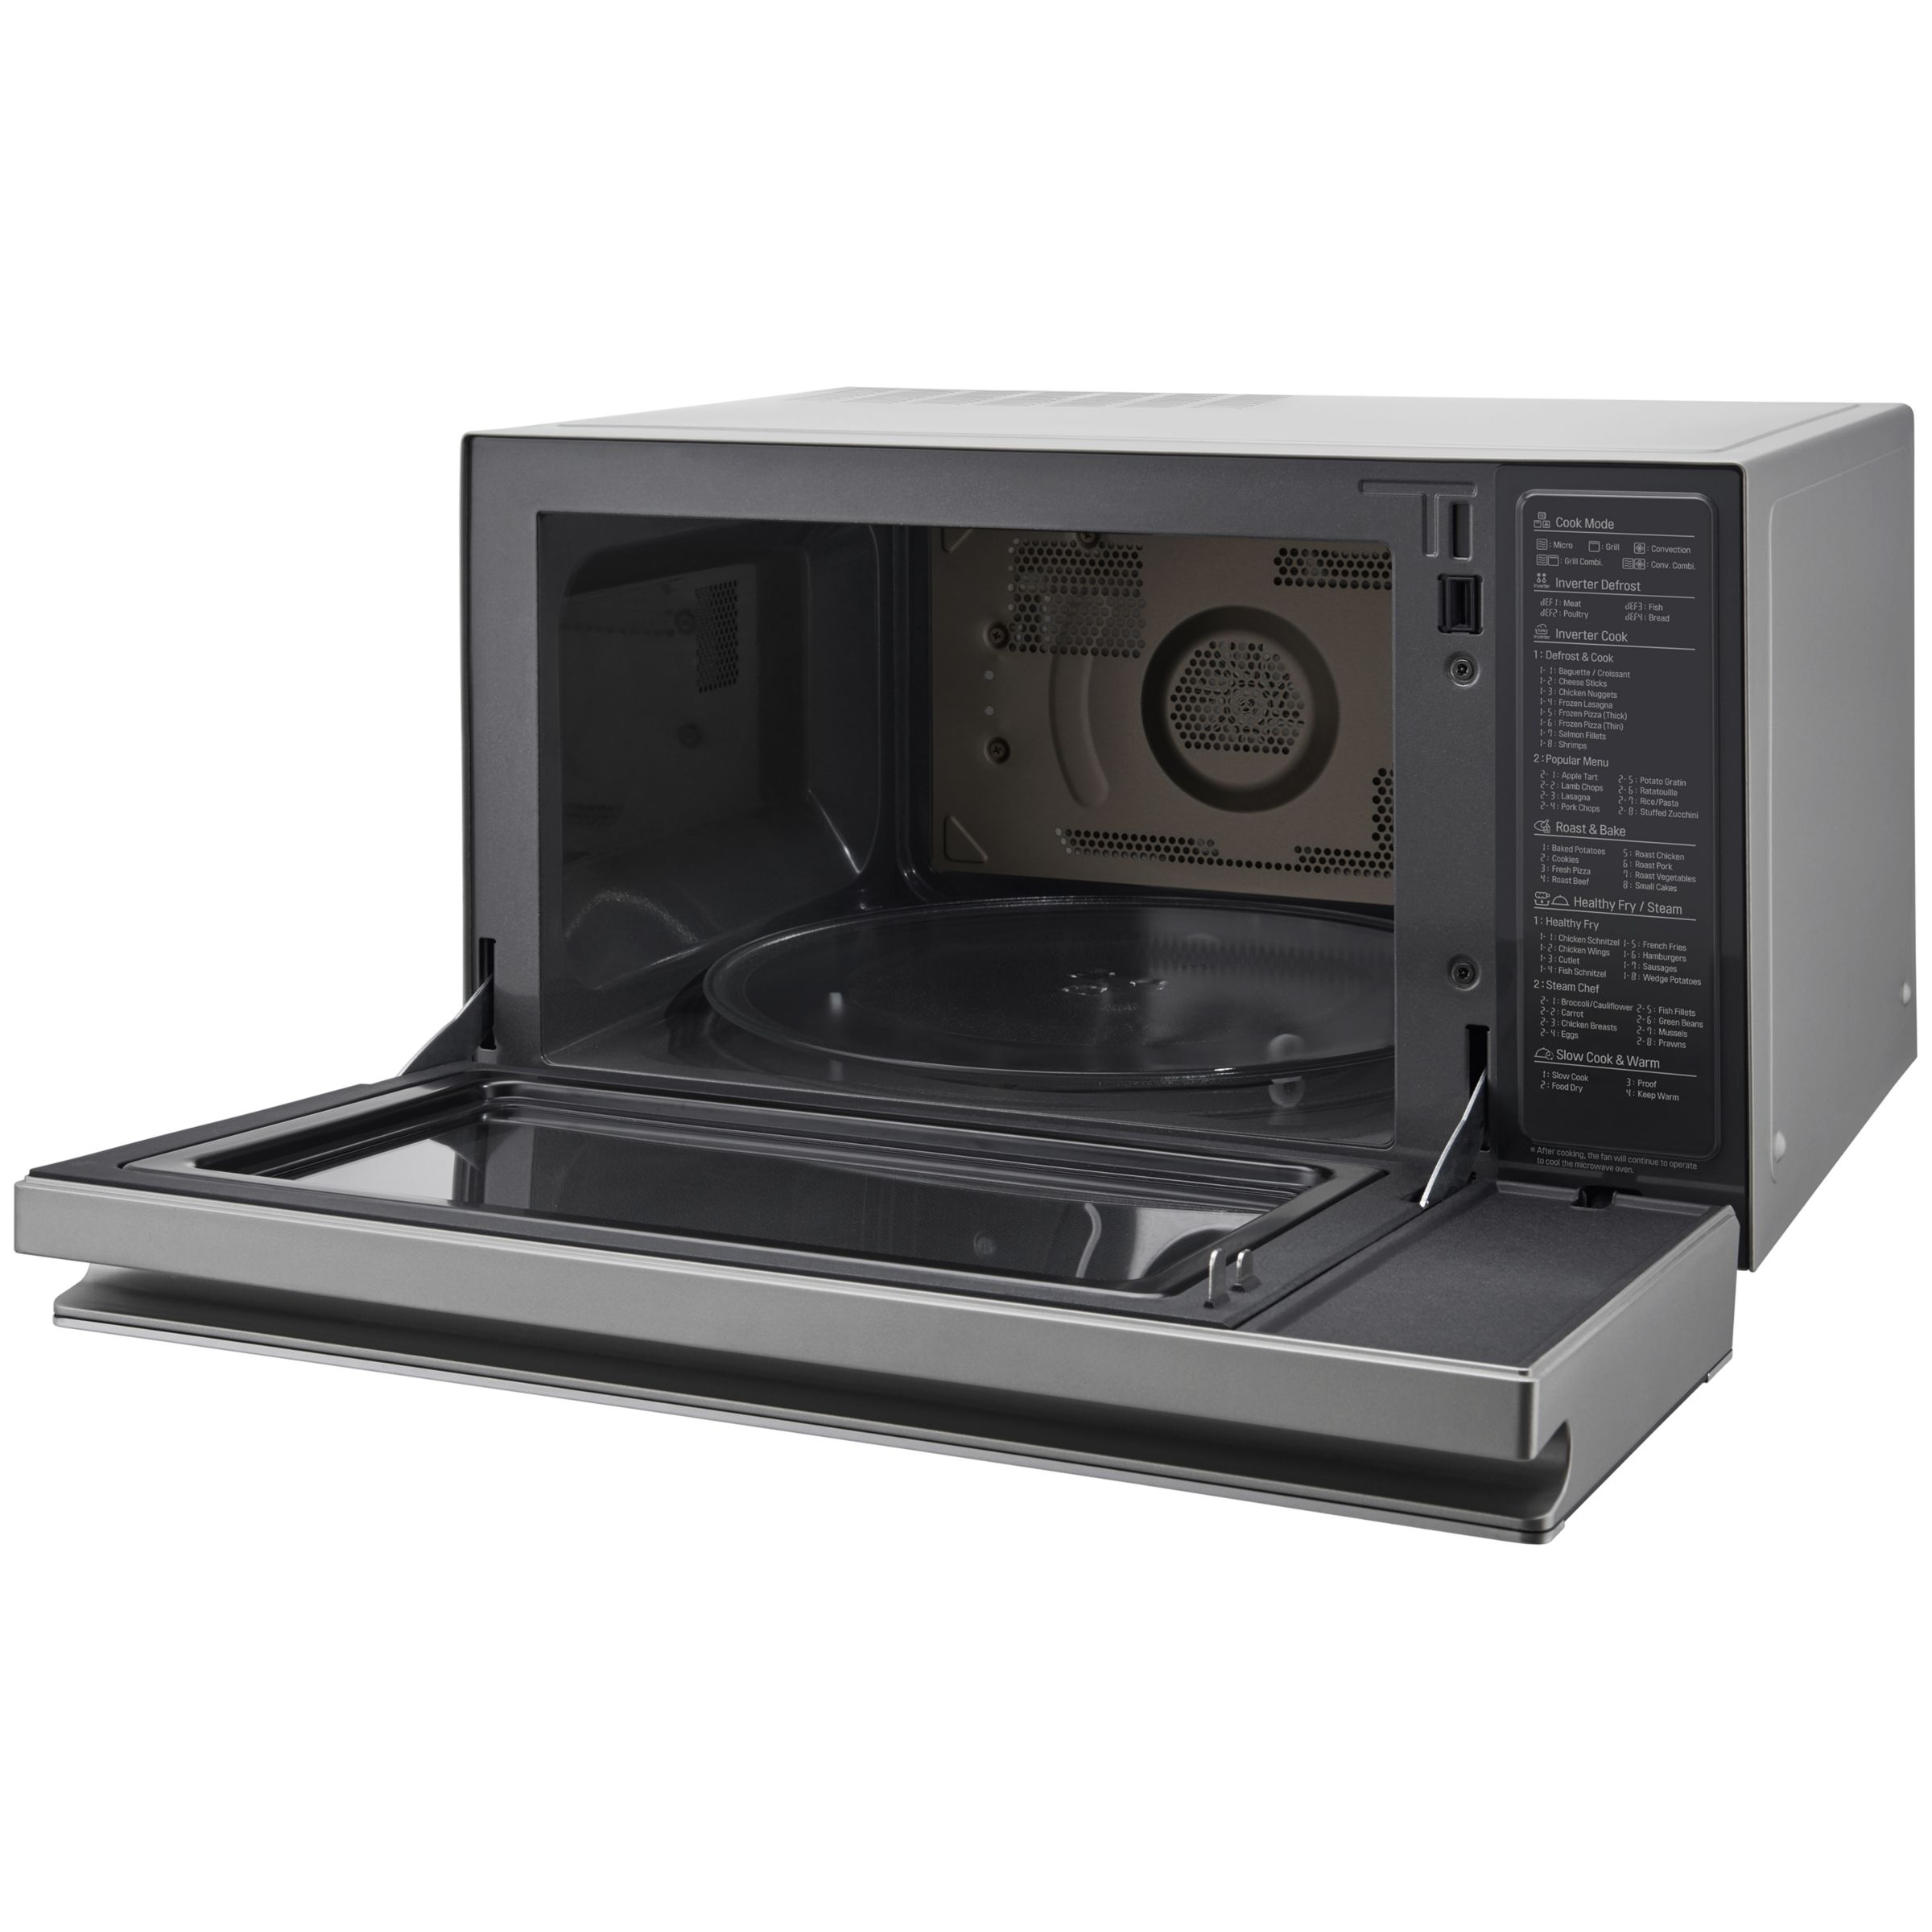 LG MJ3965ACR NeoChef Combination Microwave Oven with Steam, Stainless